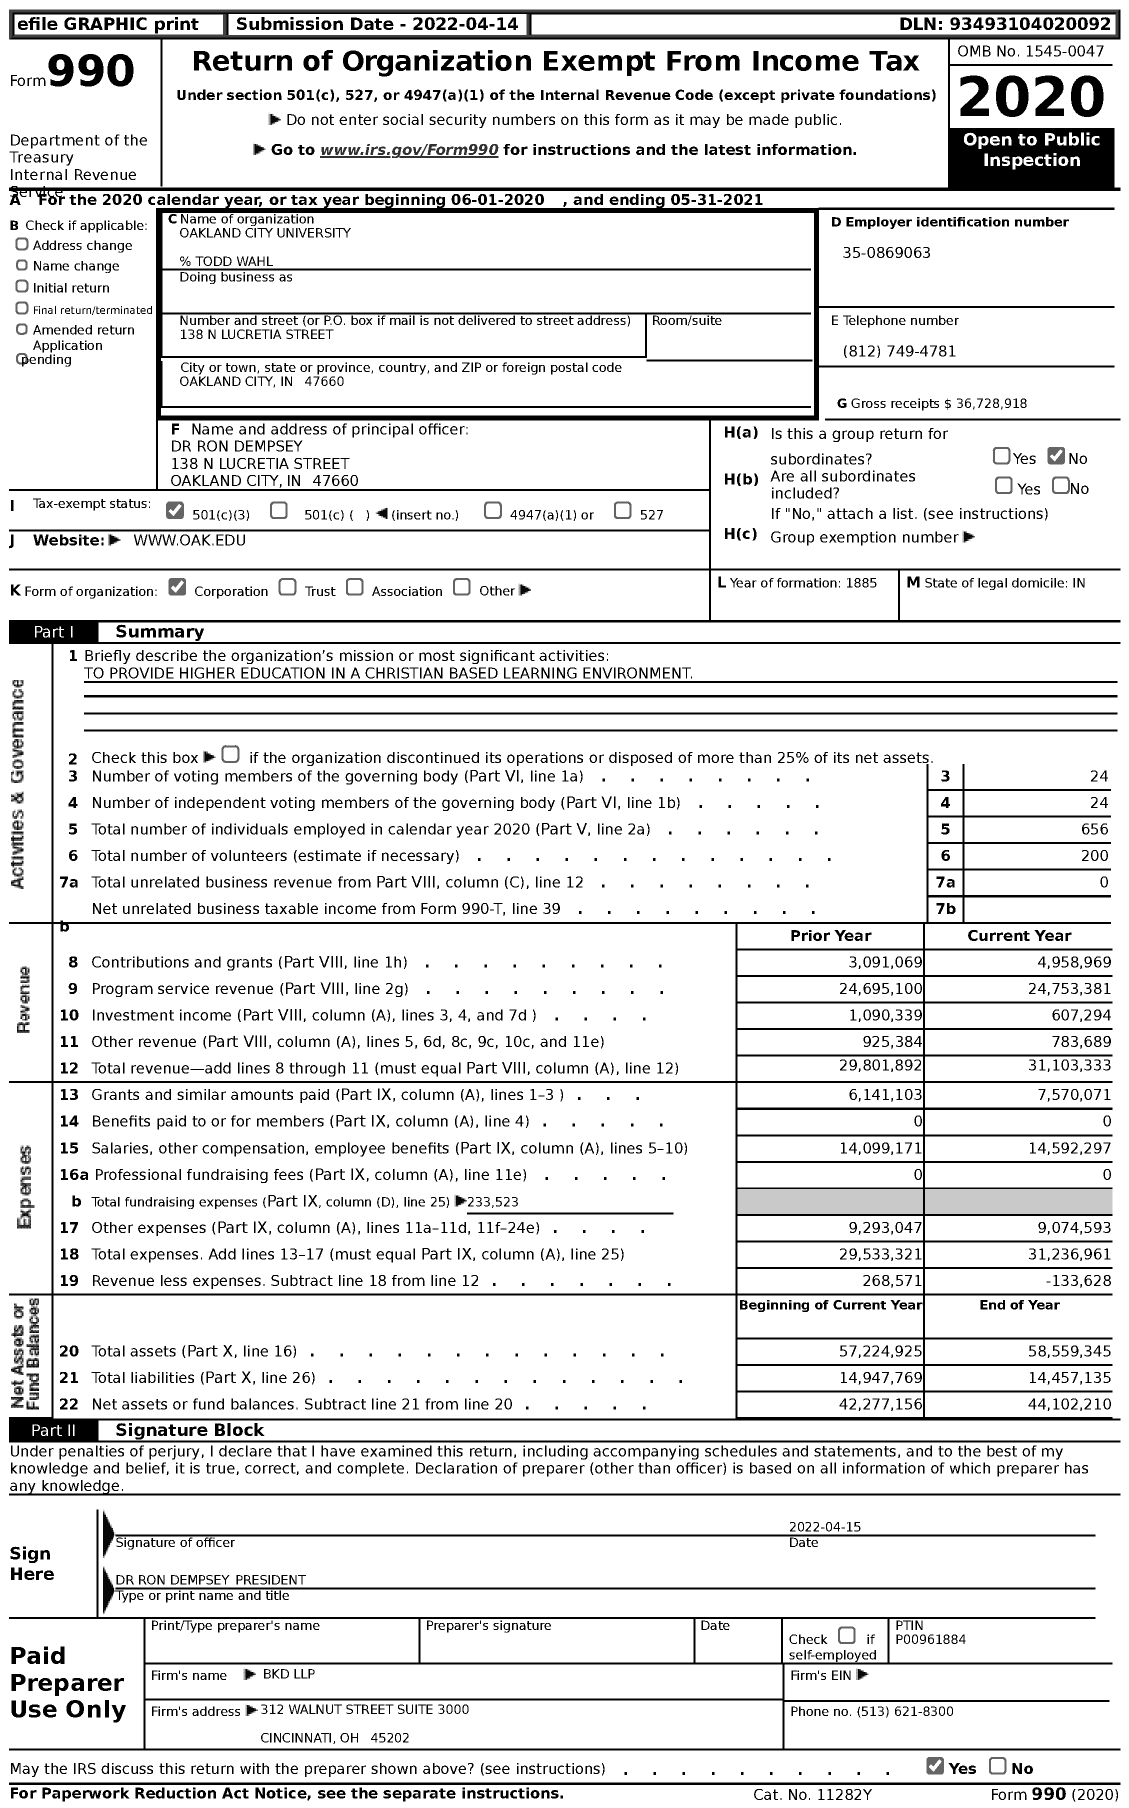 Image of first page of 2020 Form 990 for Oakland City University (OCU)